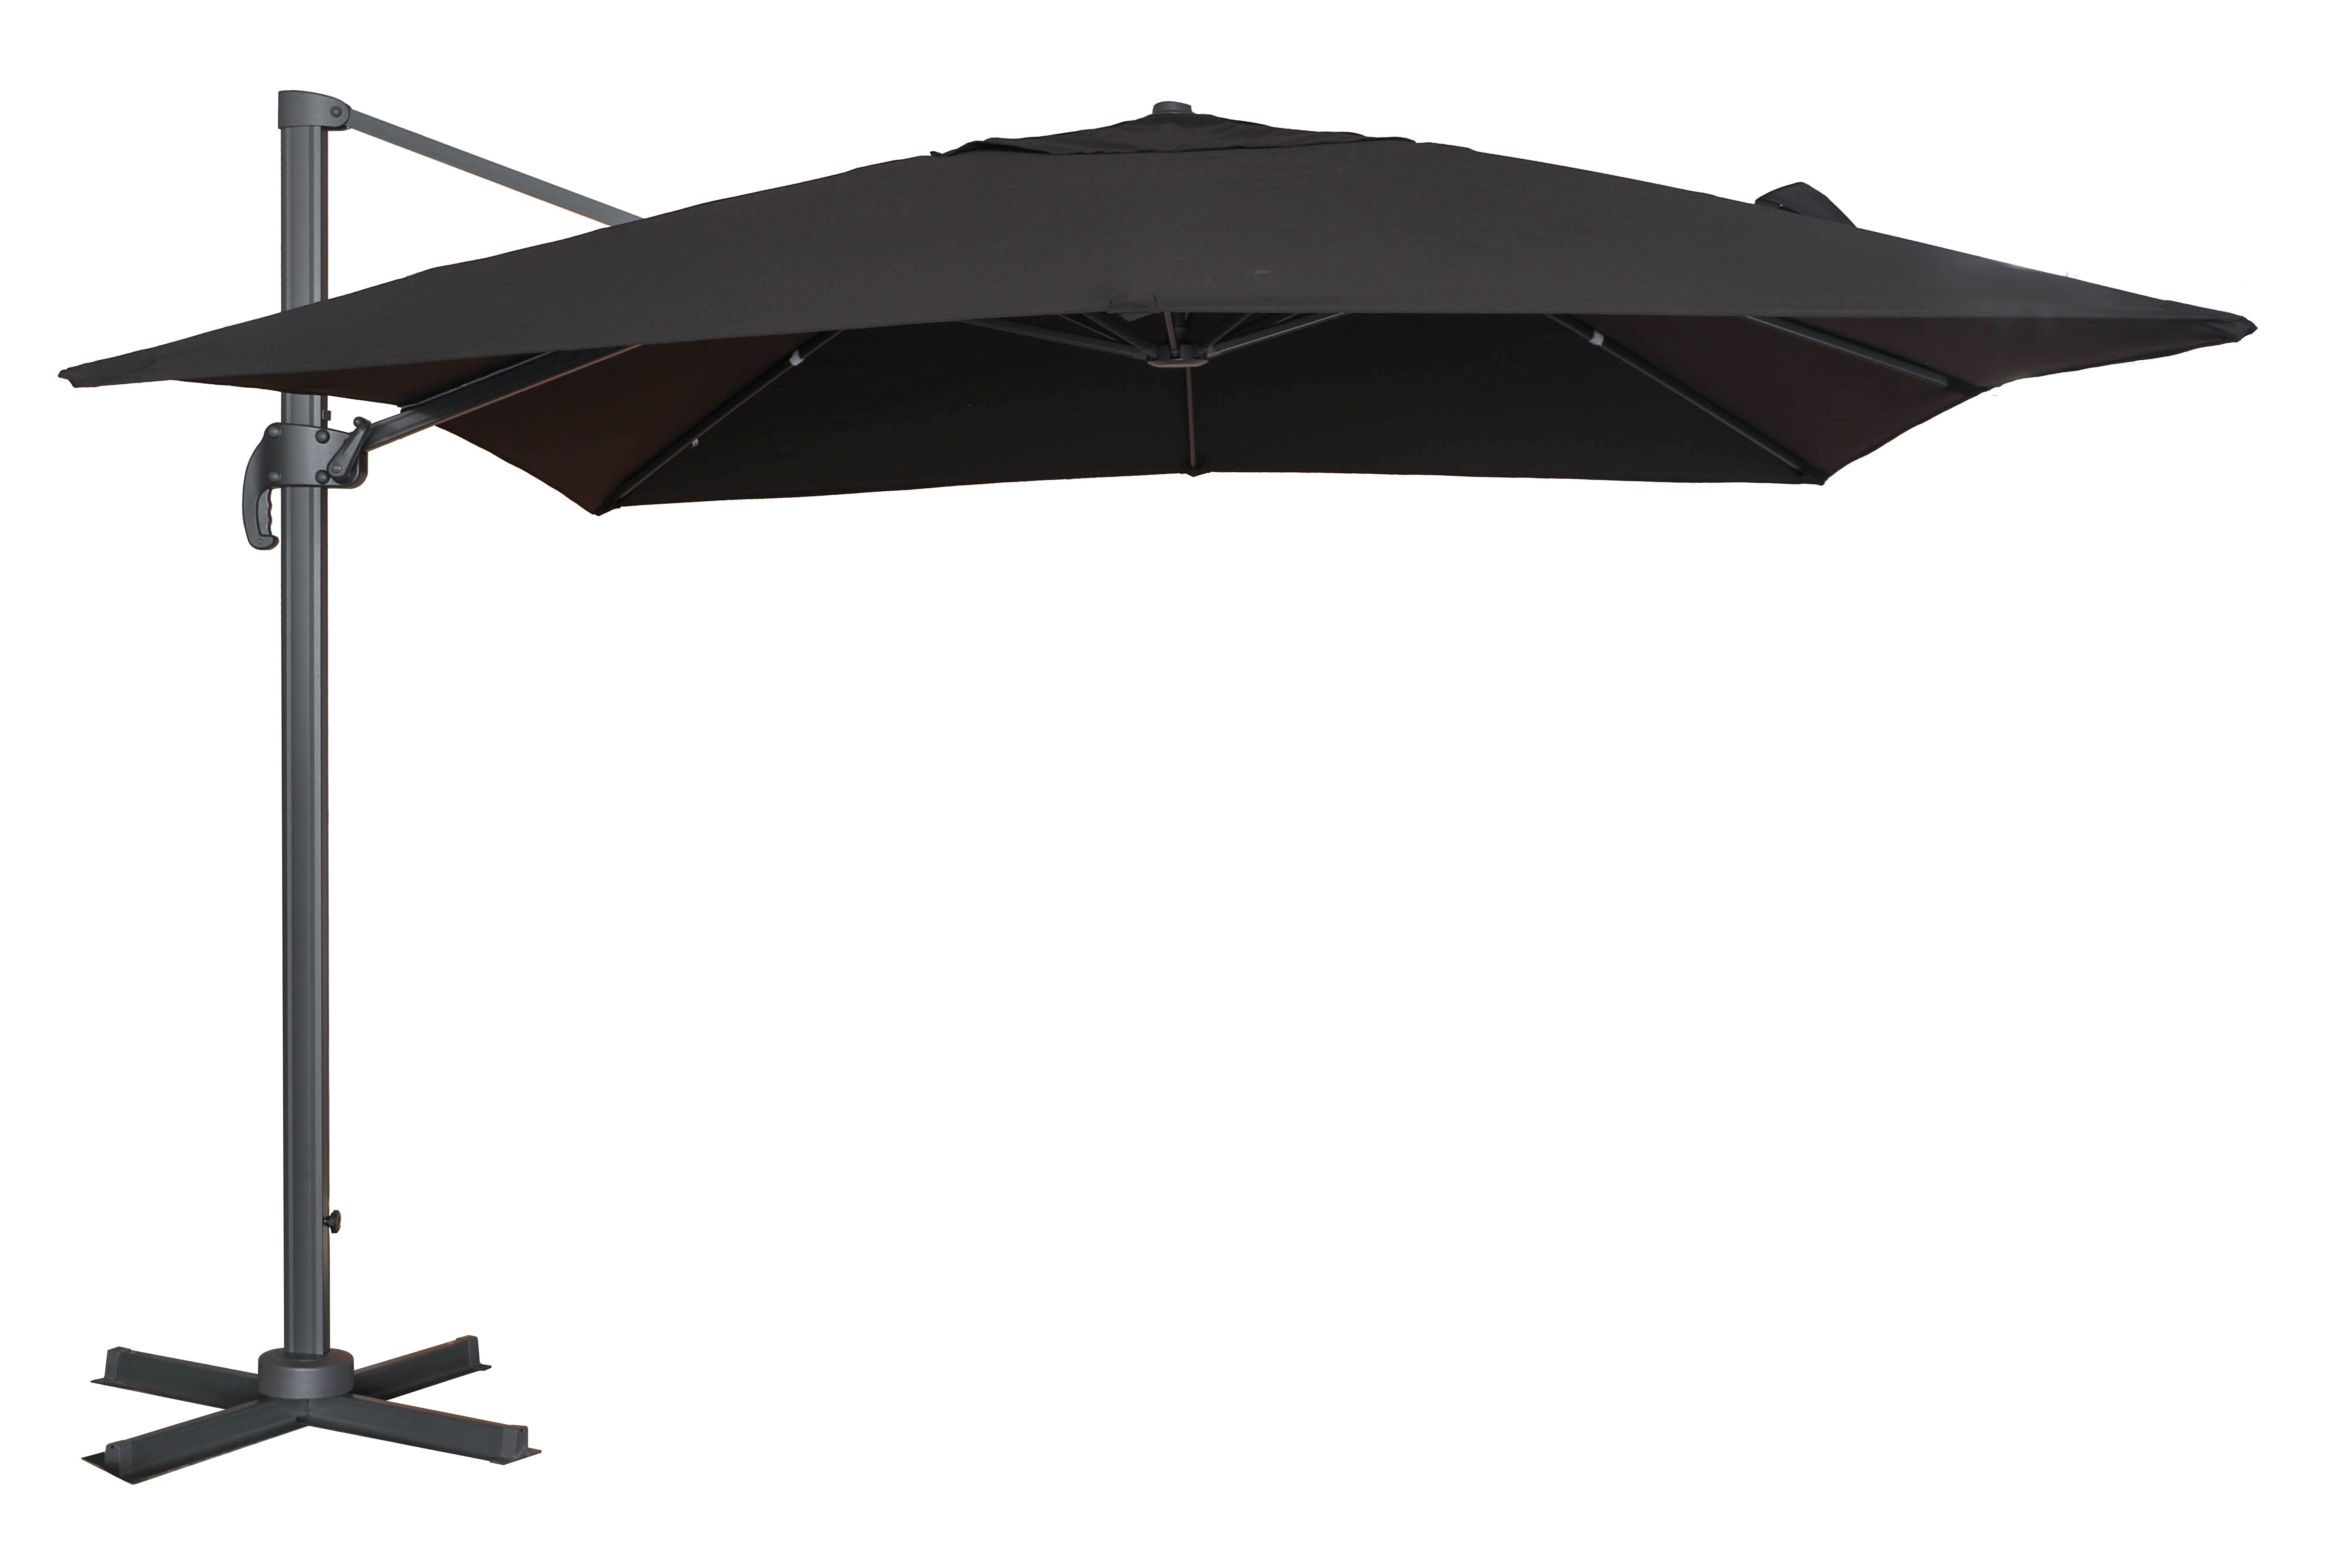 PatioZone 11' Tilting Rotating Luxury Offset Umbrella (Cover Incl.) in UV-Protected Polyester (MOSS-T1203N) - Black